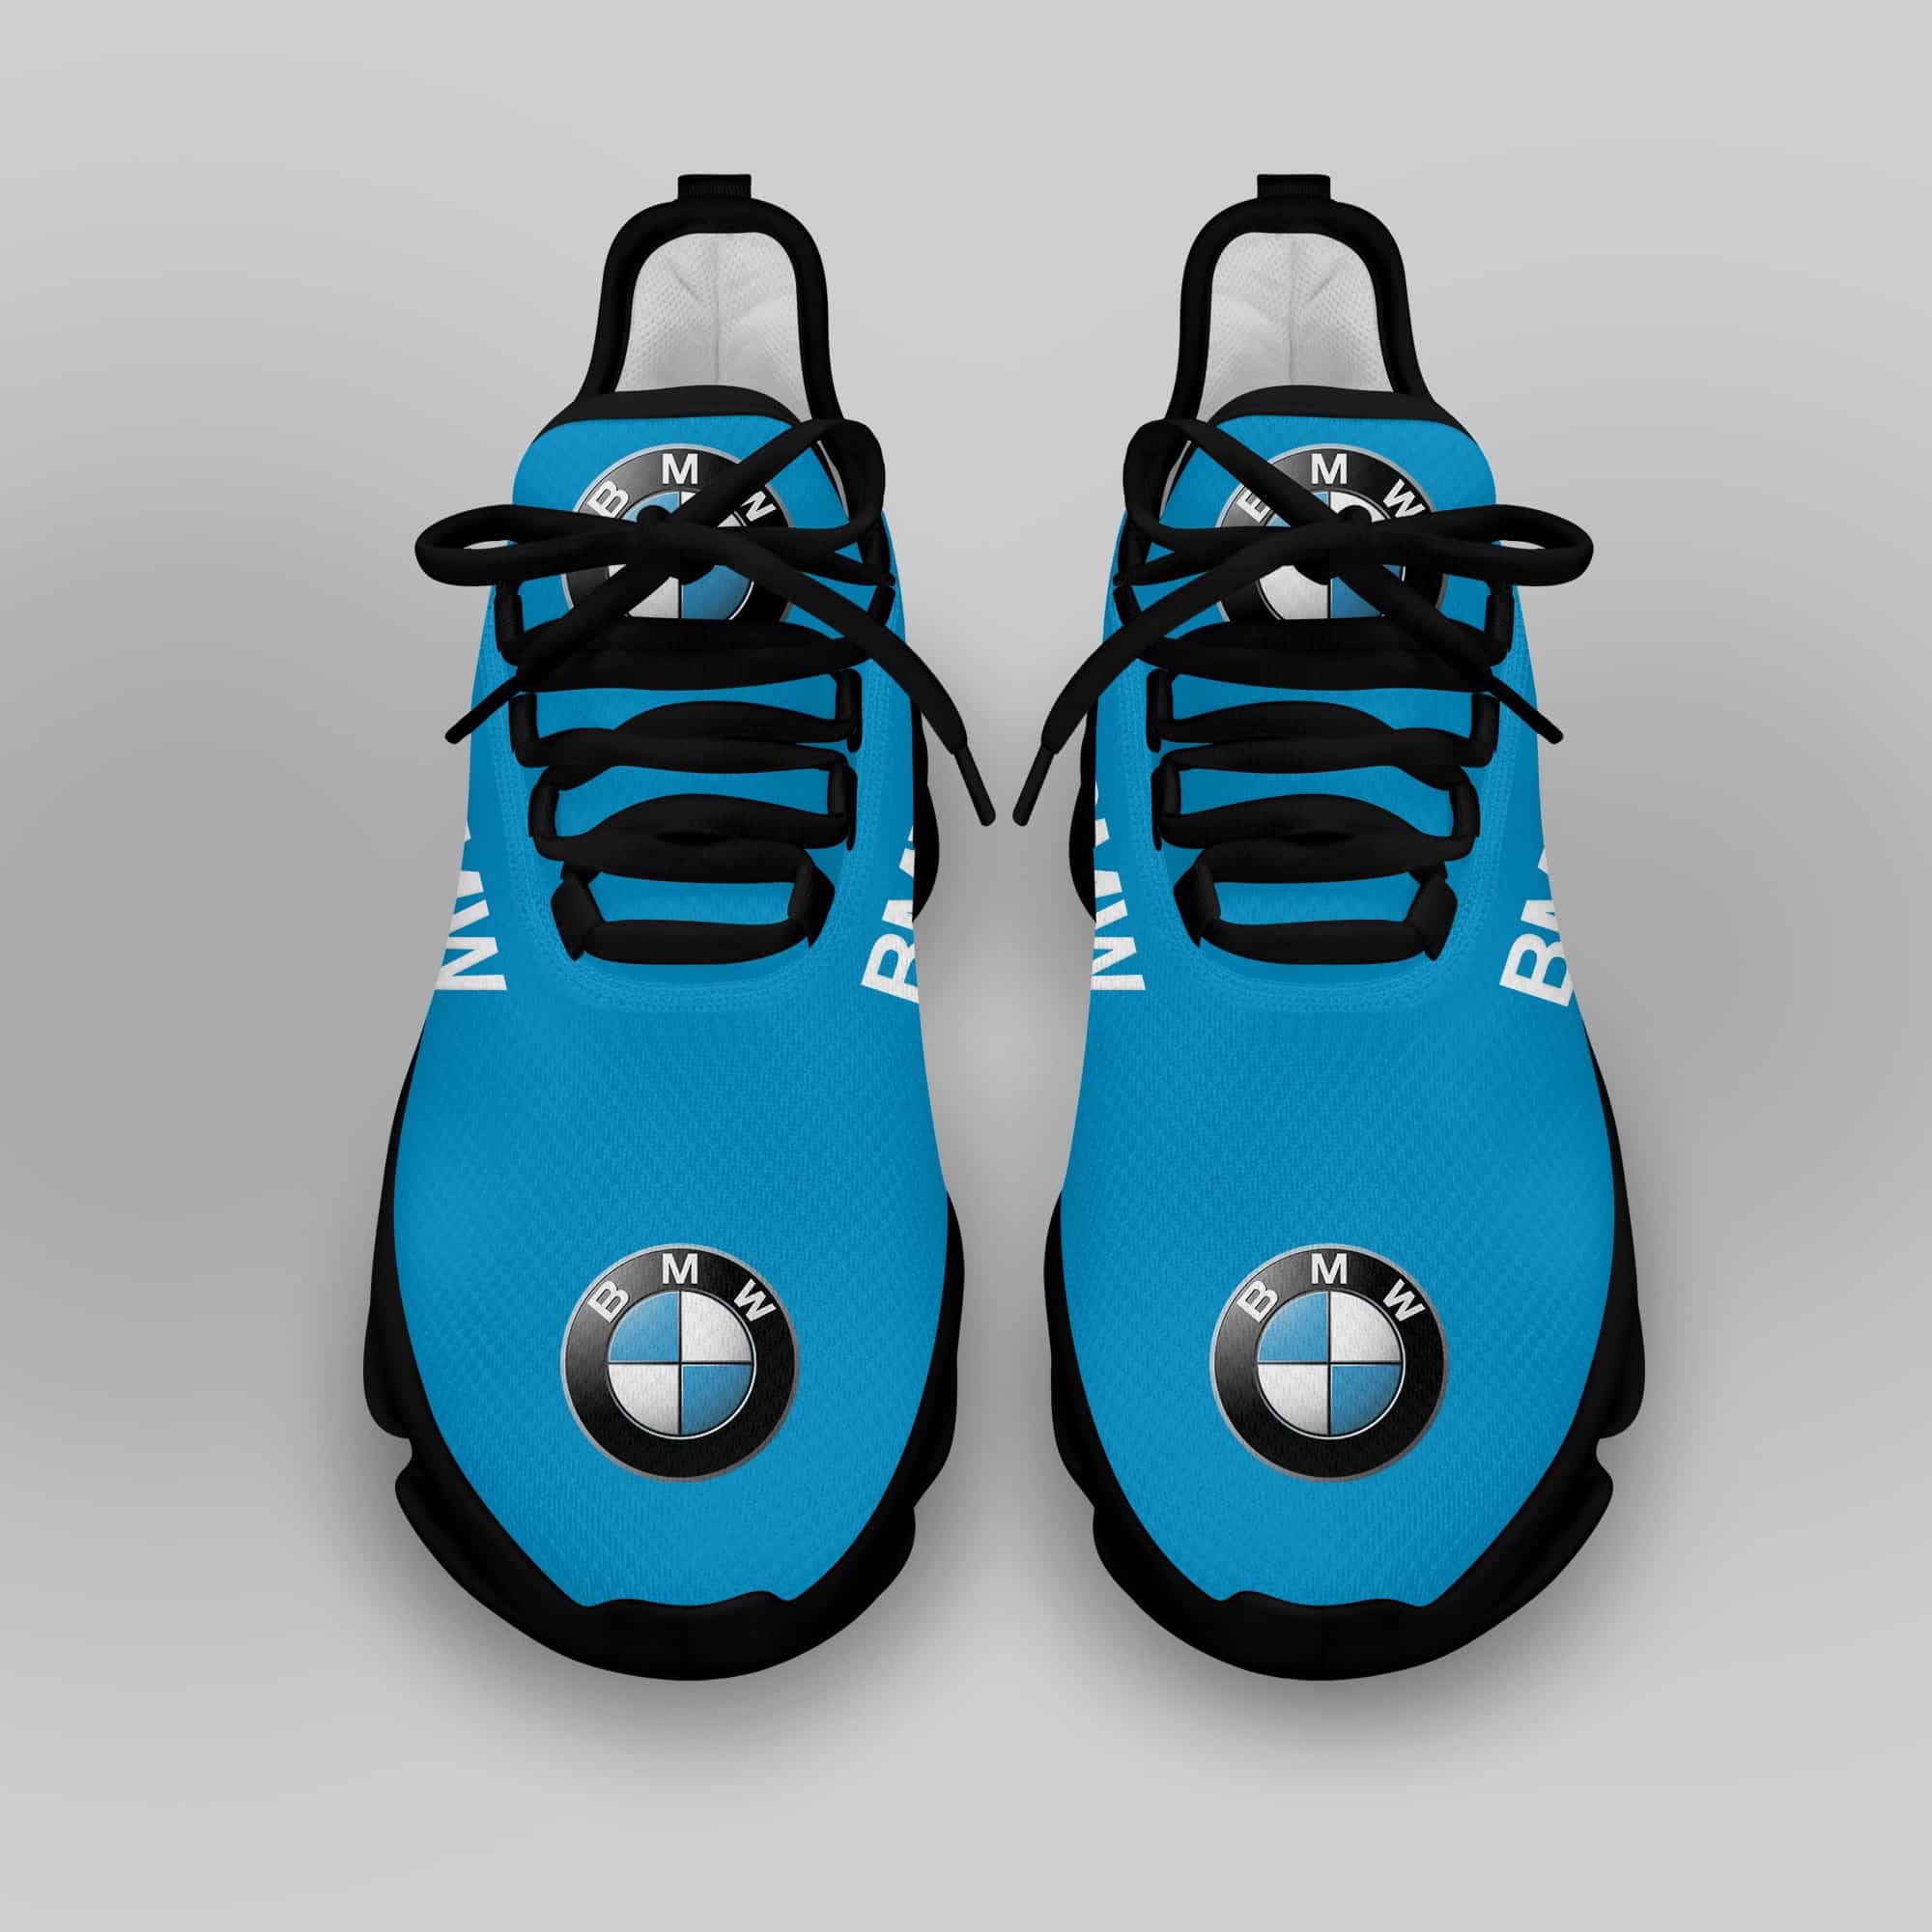 Bmw Running Shoes Max Soul Shoes Sneakers Ver 11 4